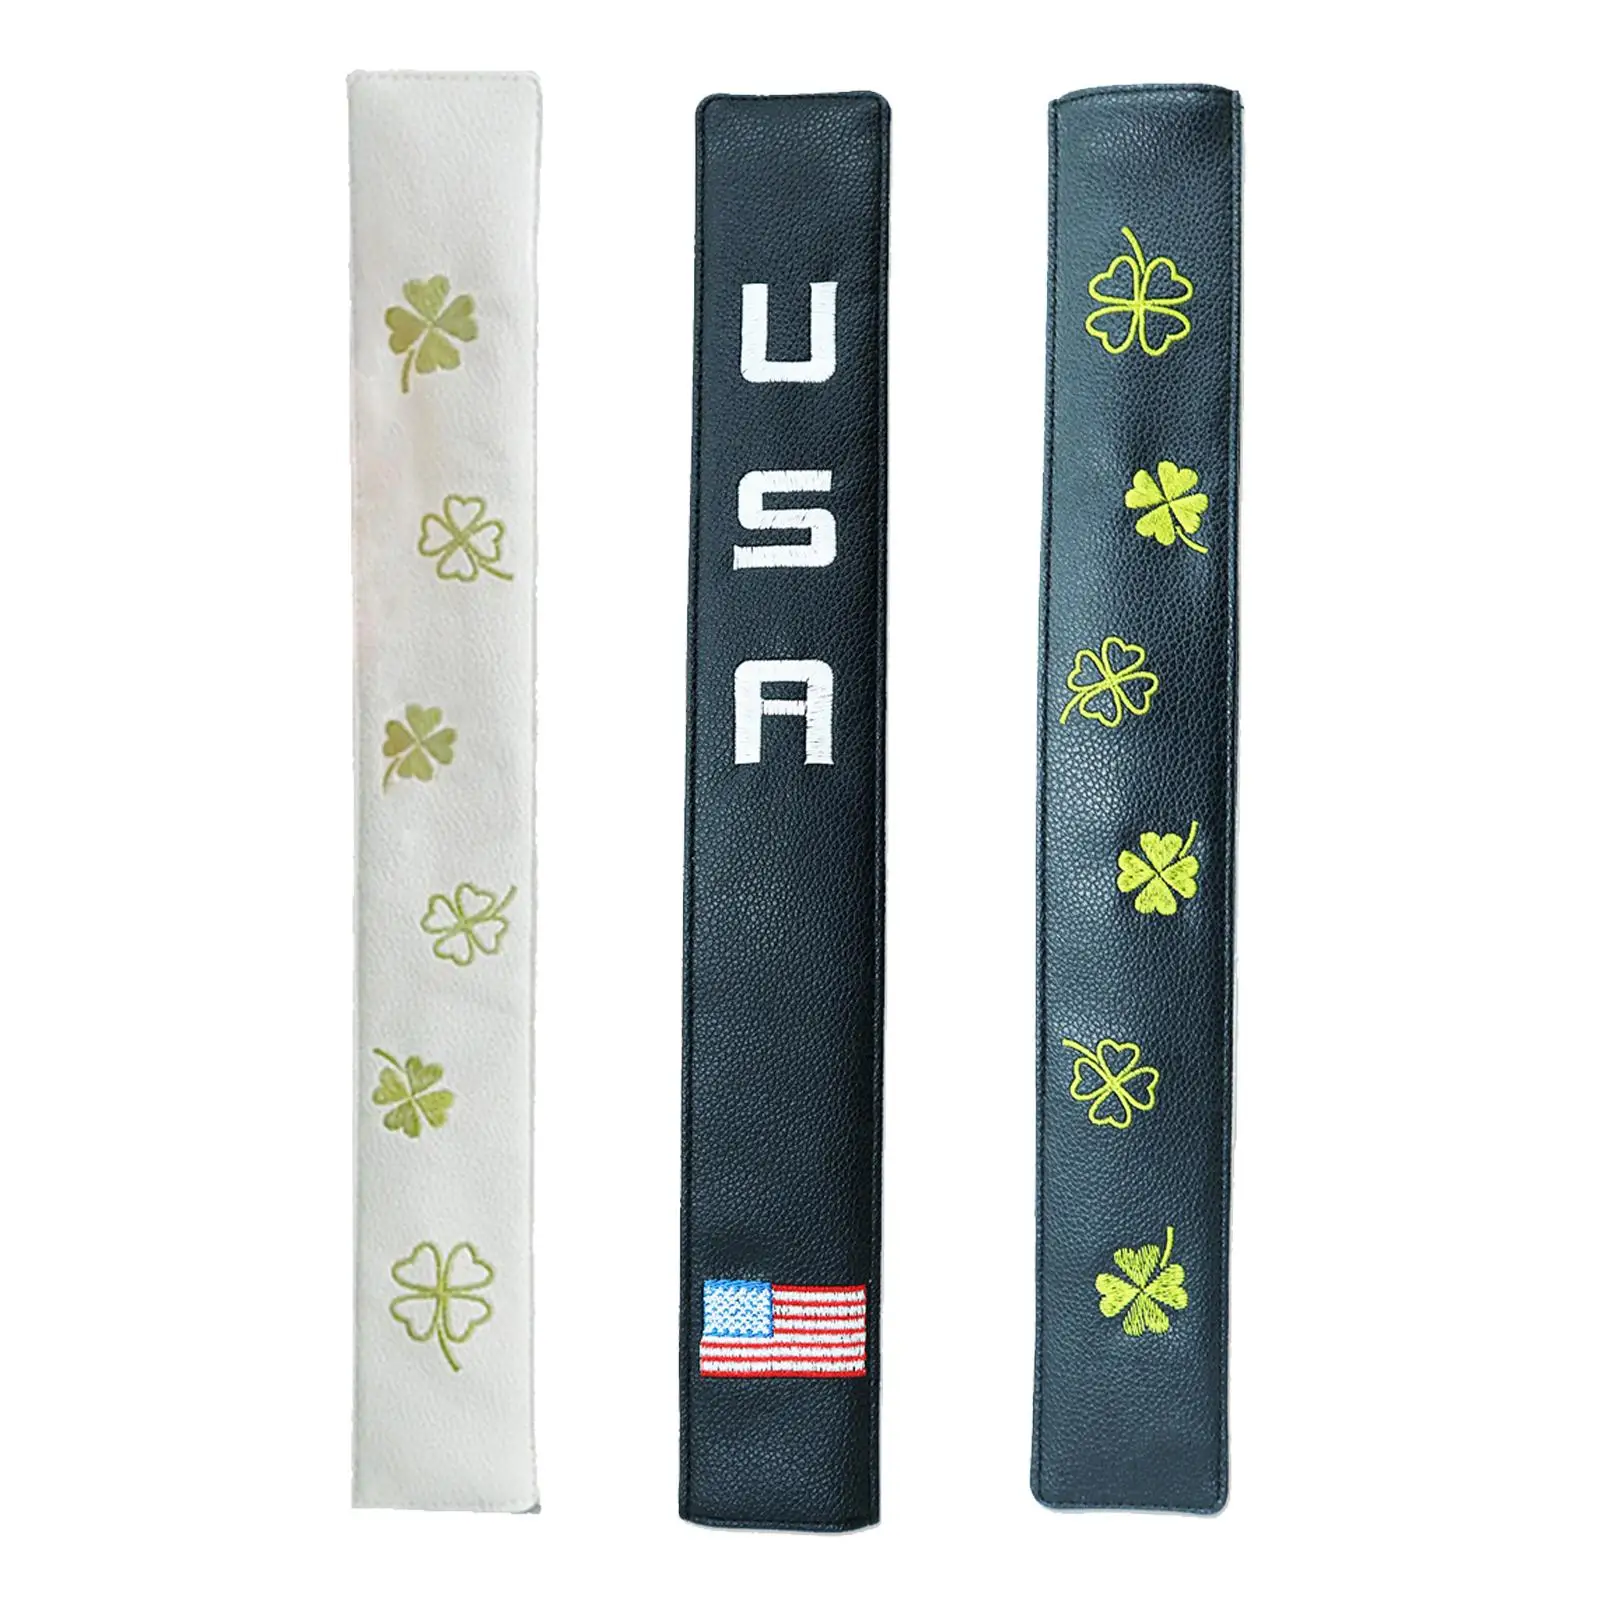 PU Leather Golf Alignment Stick Cover Four Sticks Covers Case Holder Golfer Accessories